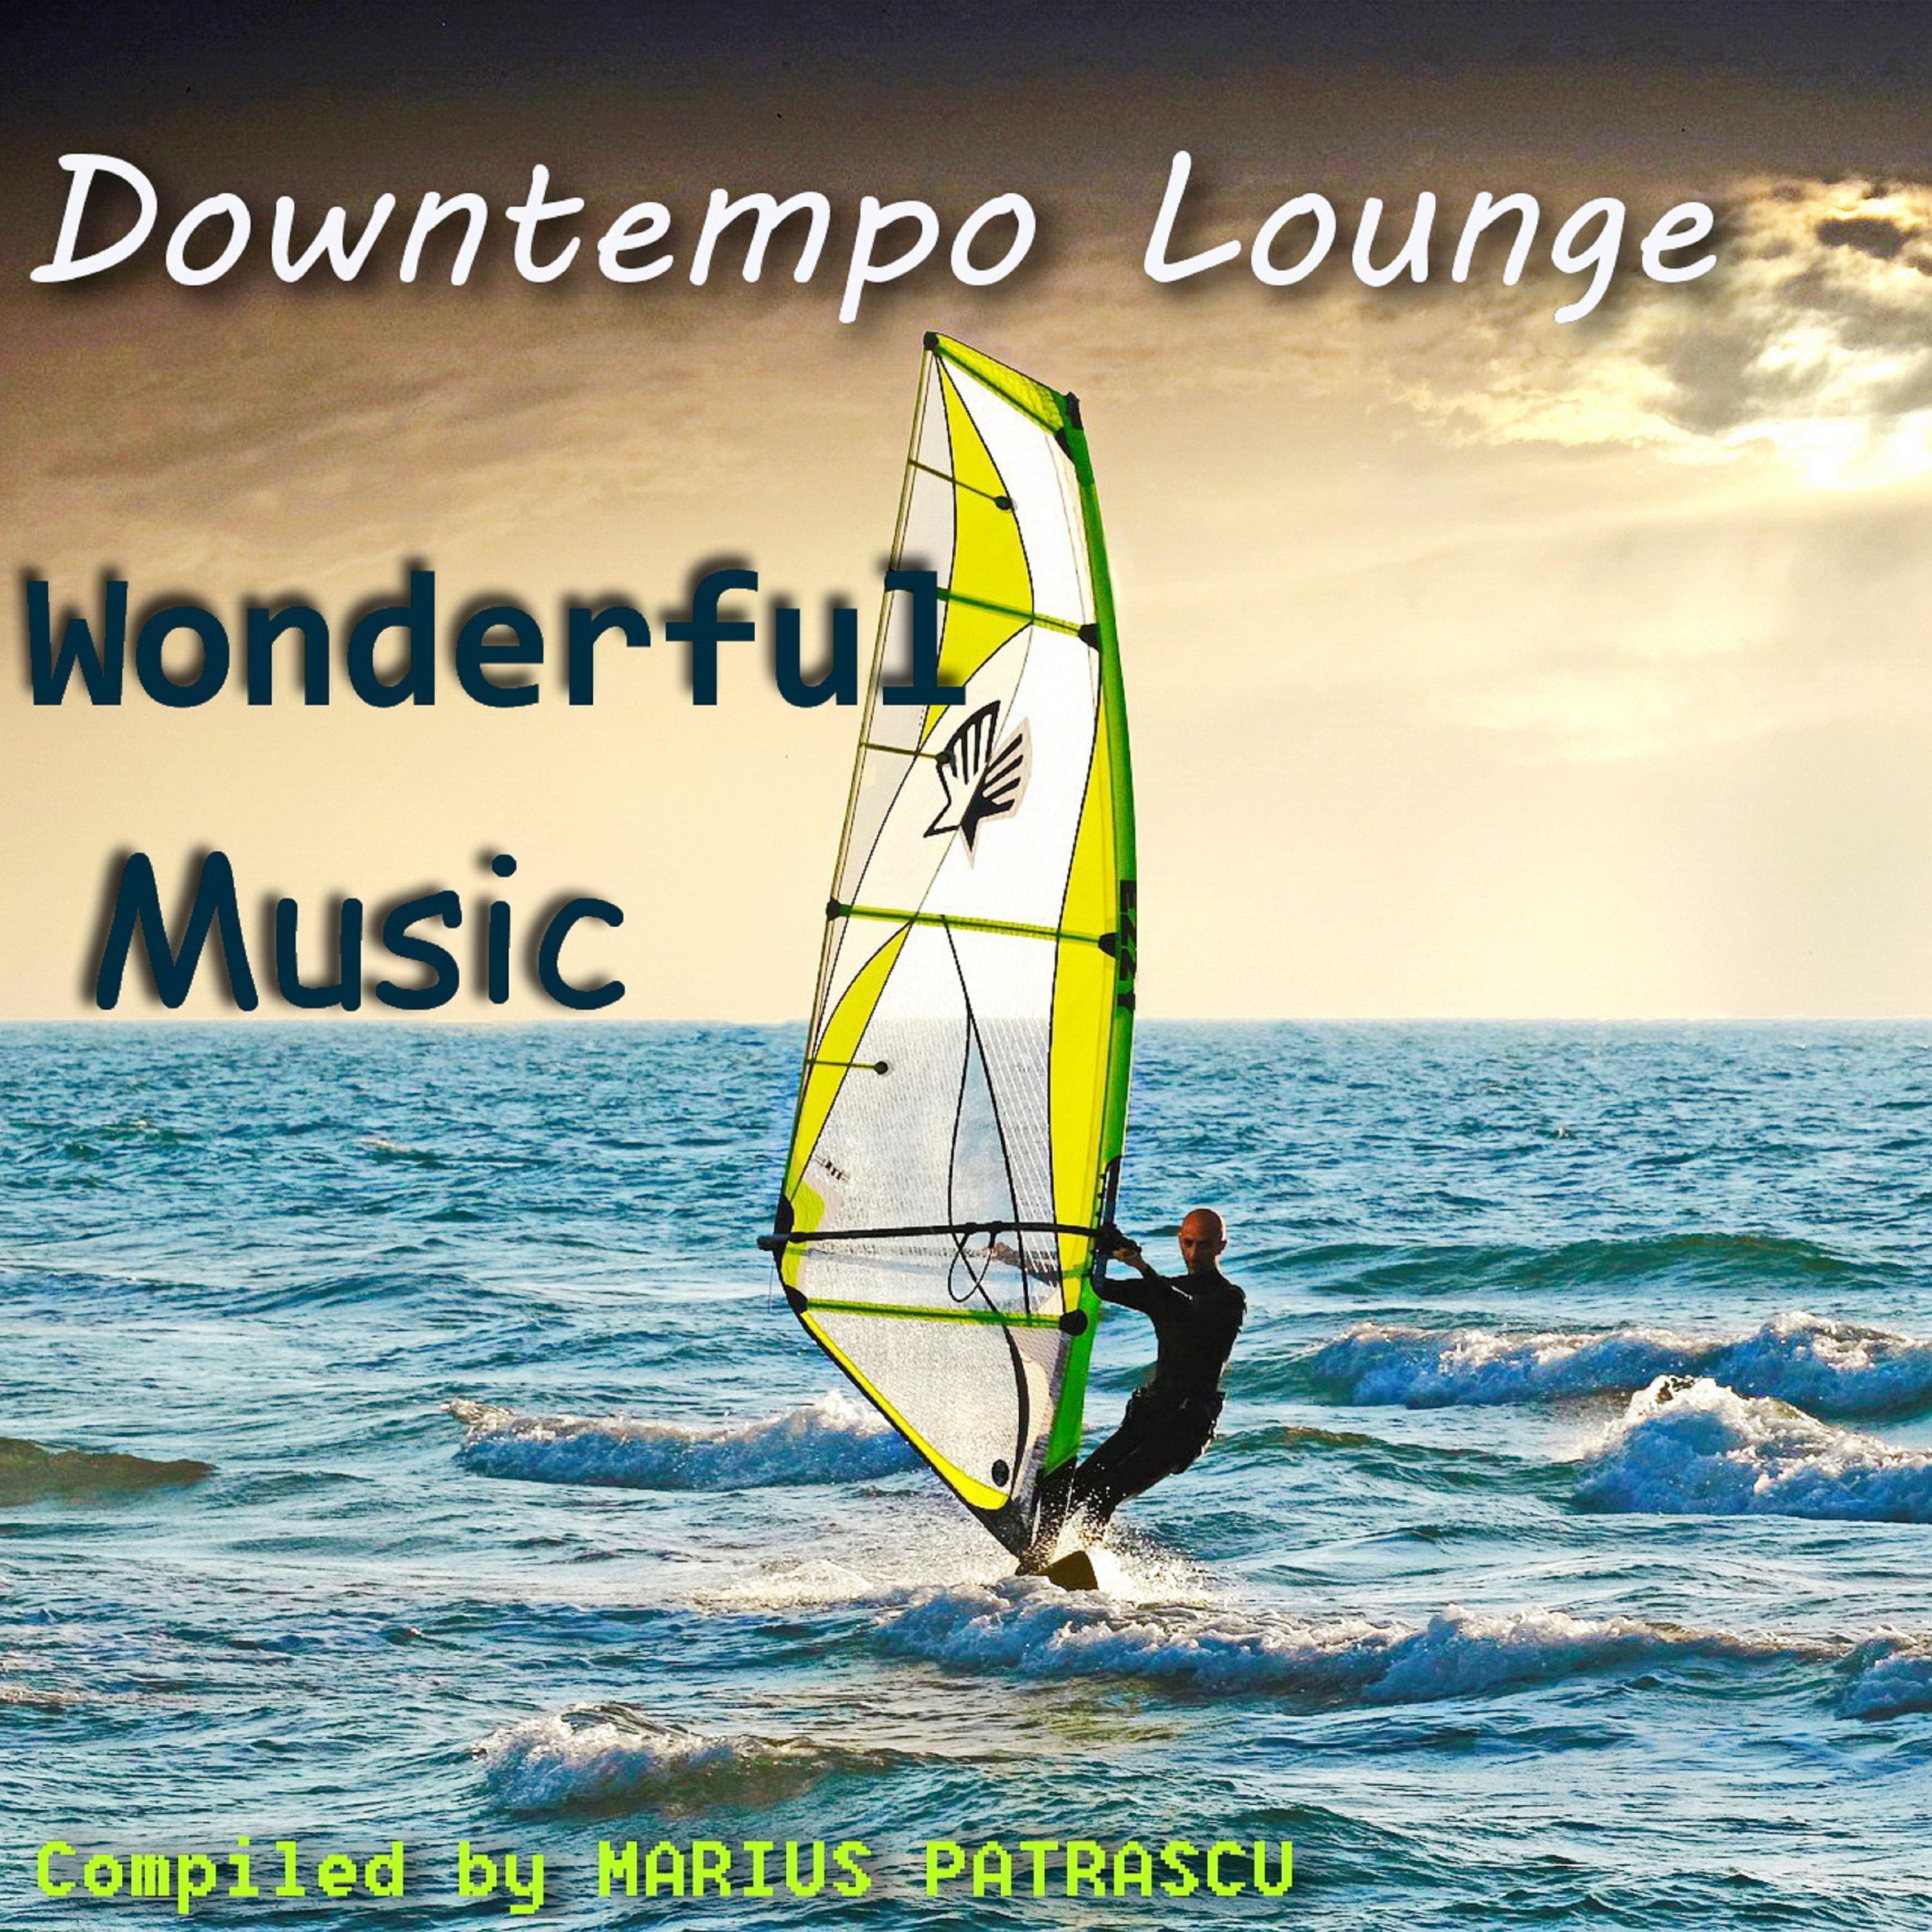 Downtempo Lounge Wonderful Music (Compiled and Mixed by Marius Patrascu)